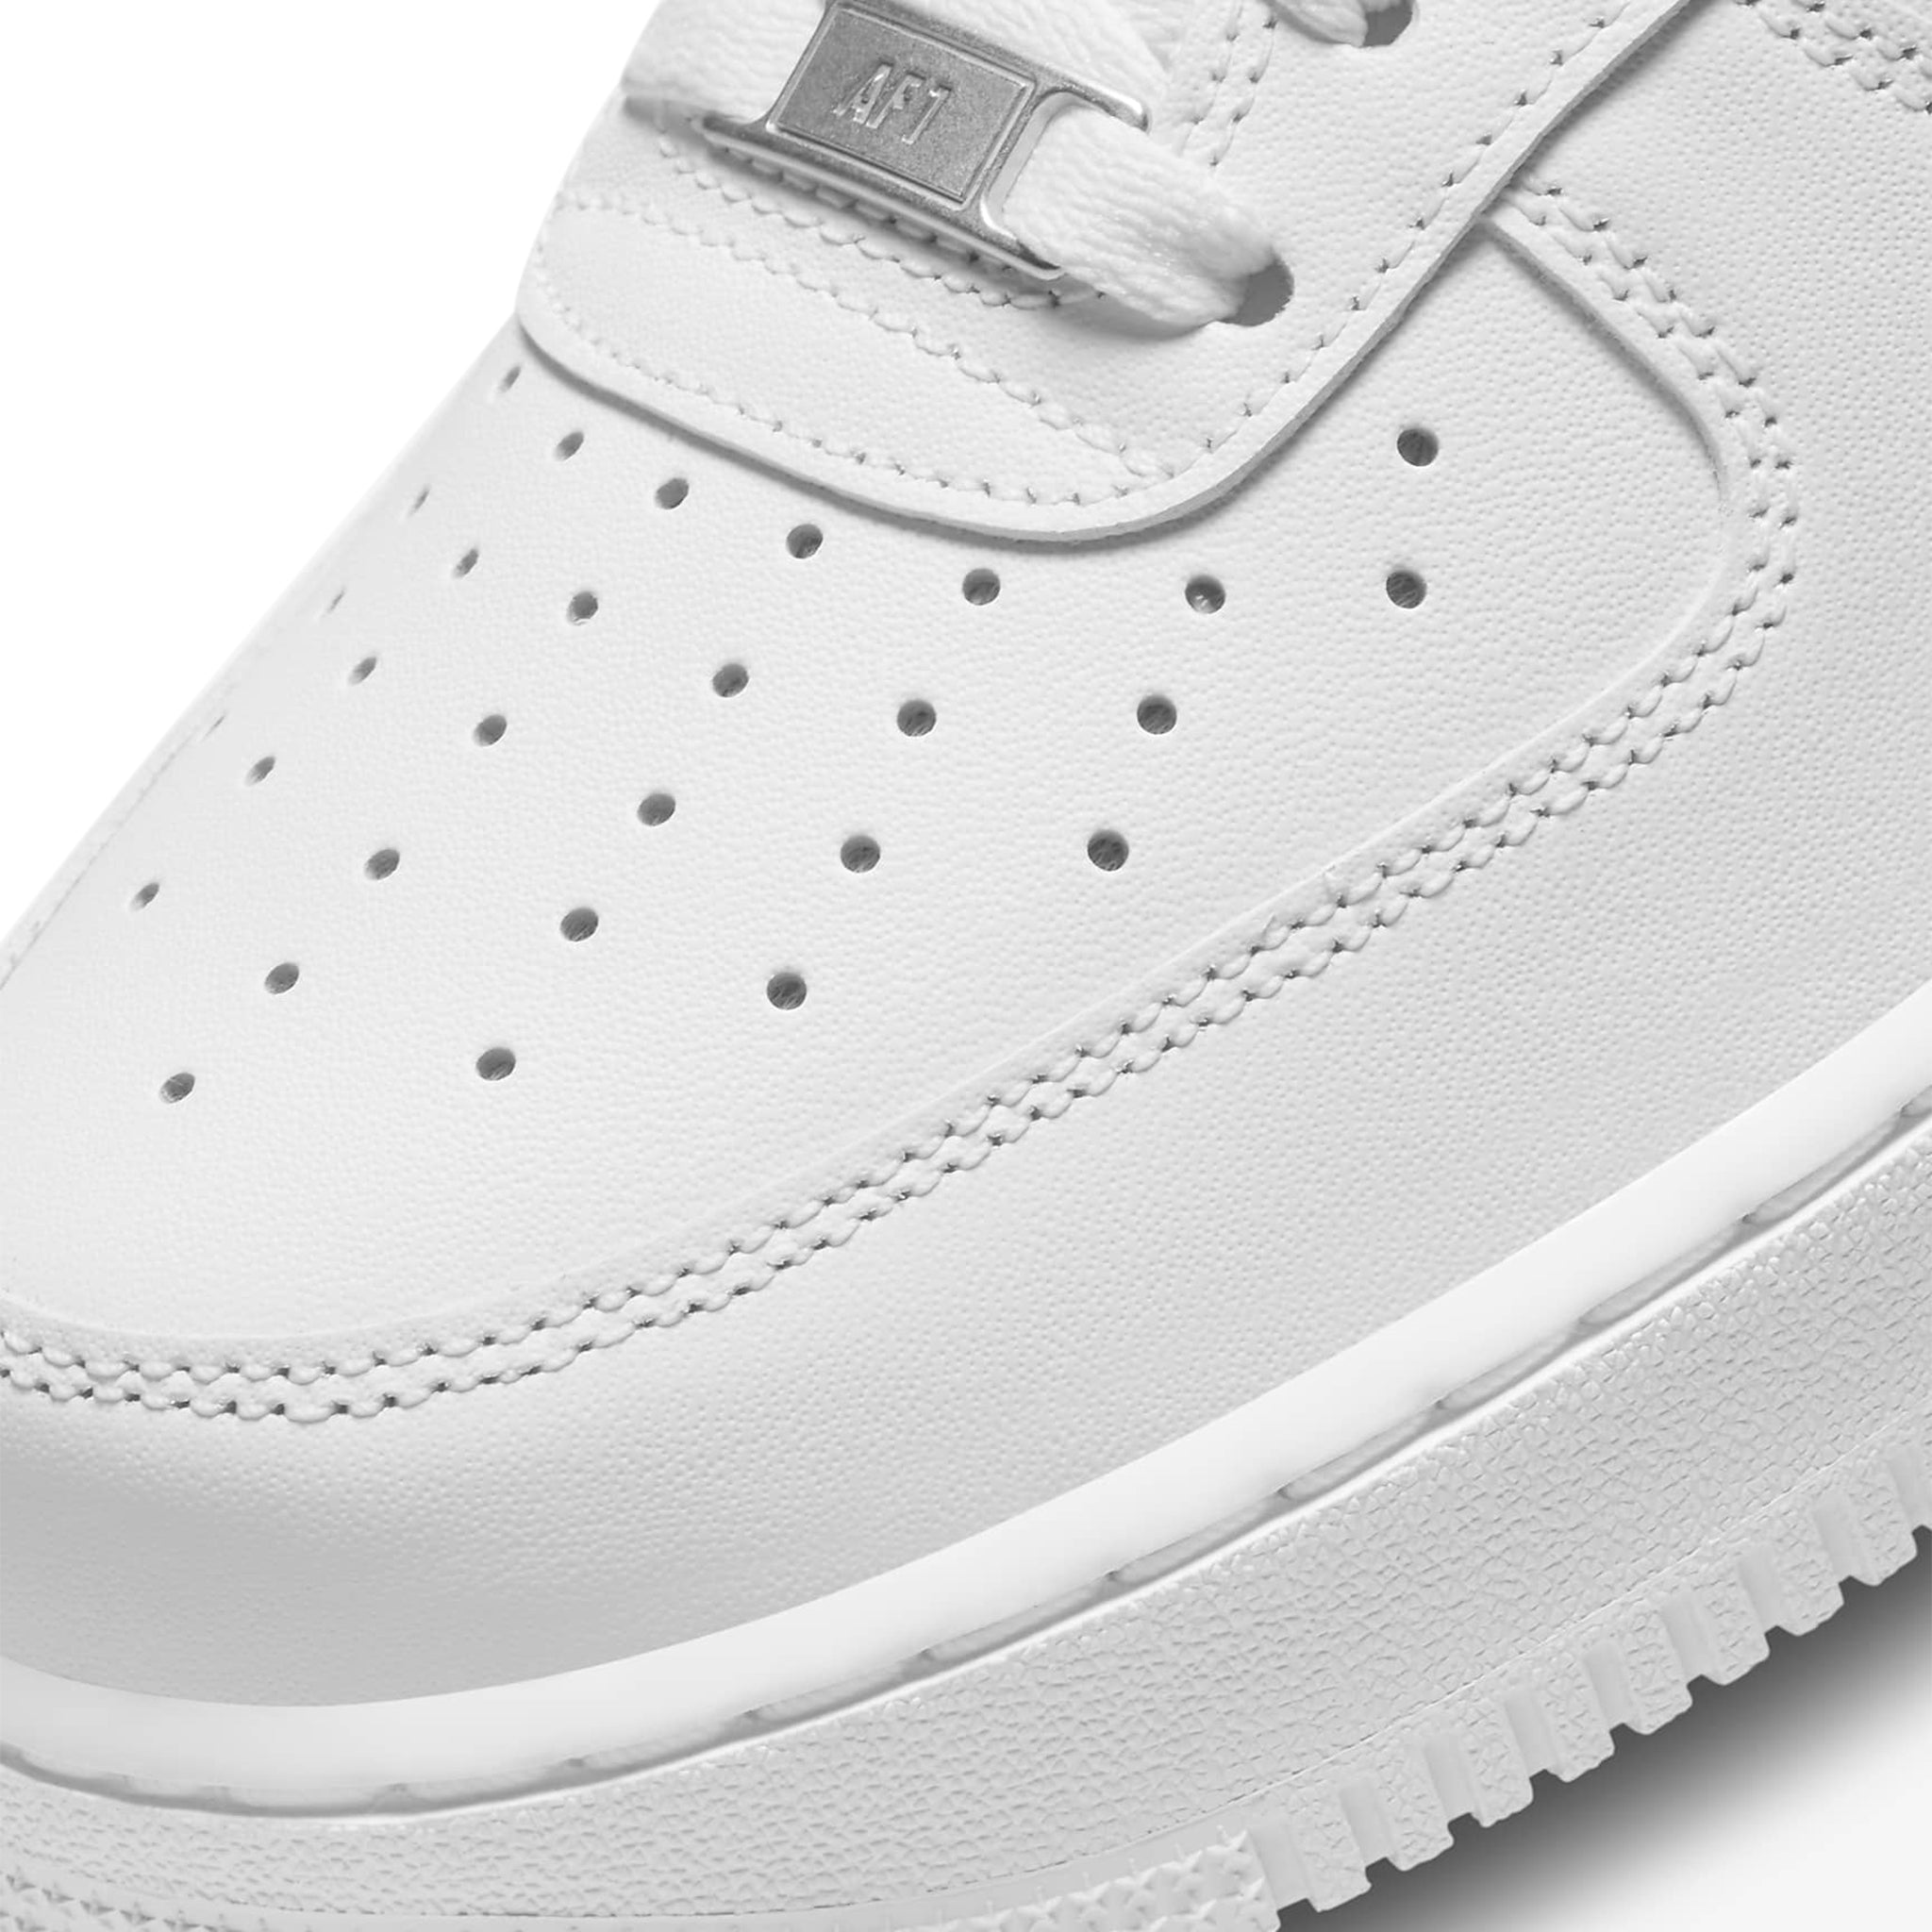 Toe box view of Nike Air Force 1 Low '07 White